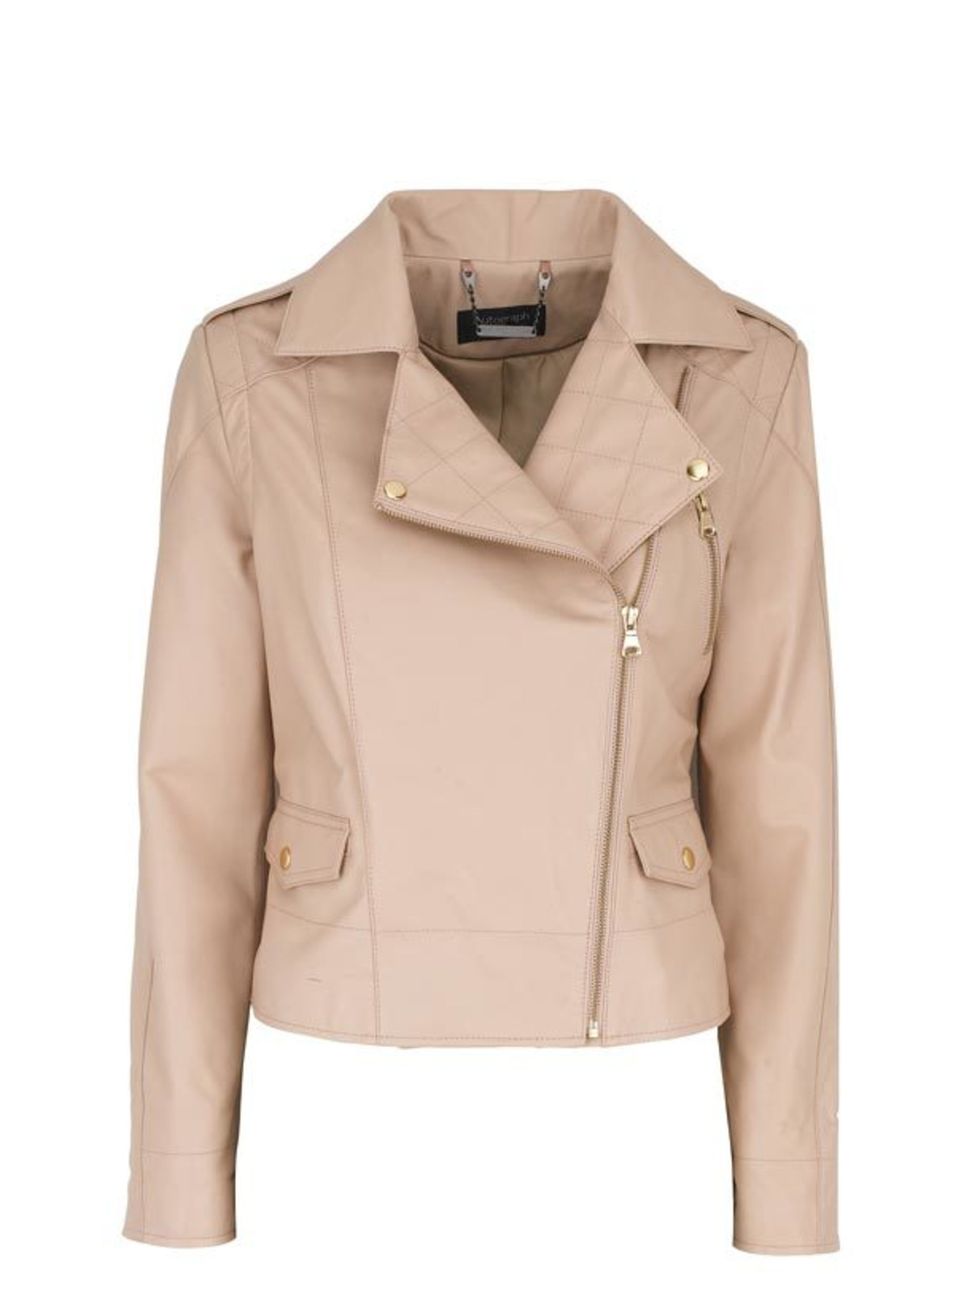 <p>We cant imagine life without a leather jacket but black styles can be a bit harsh for spring. M&amp;S has found the answer with this peachy style <a href="http://www.marksandspencer.com/Coats-Jackets-Womens/b/43109030?ie=UTF8&amp;intid=gnav_women_coa